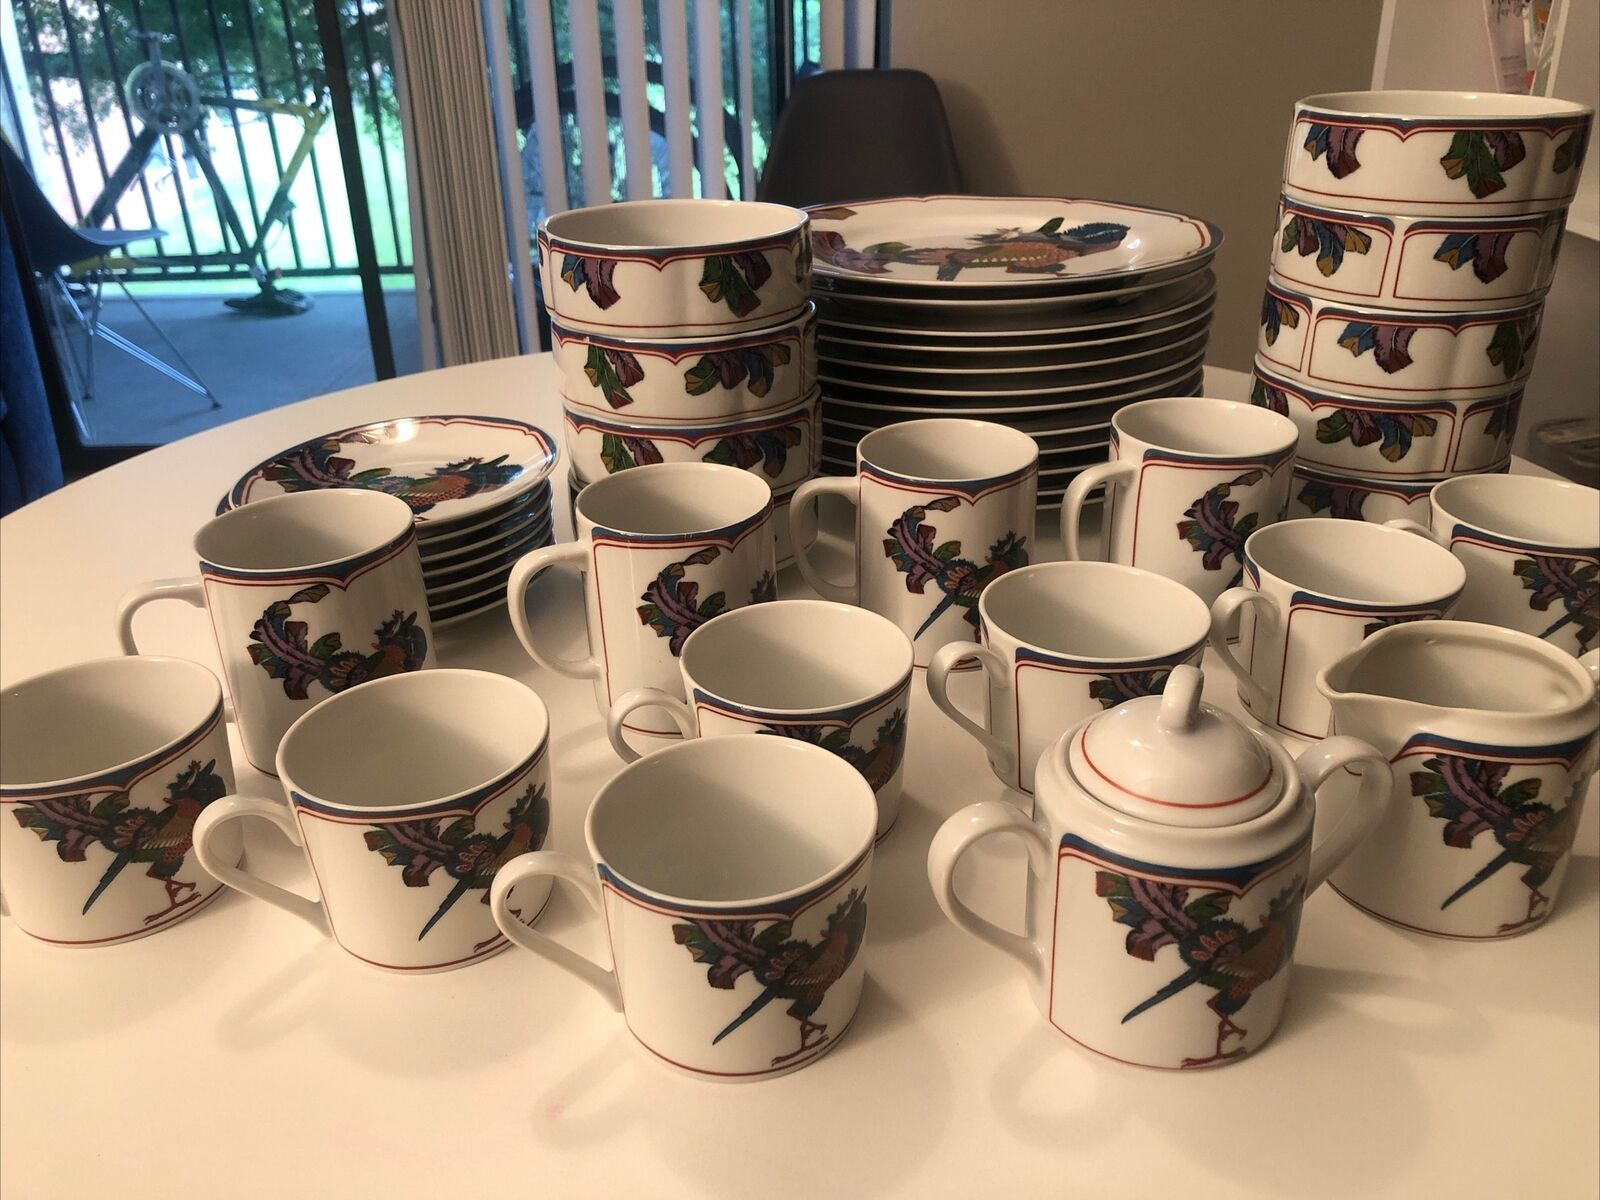 41 Georges Briard Oriental Peacock Reproduction Mugs Tea Cups Saucers & Plates